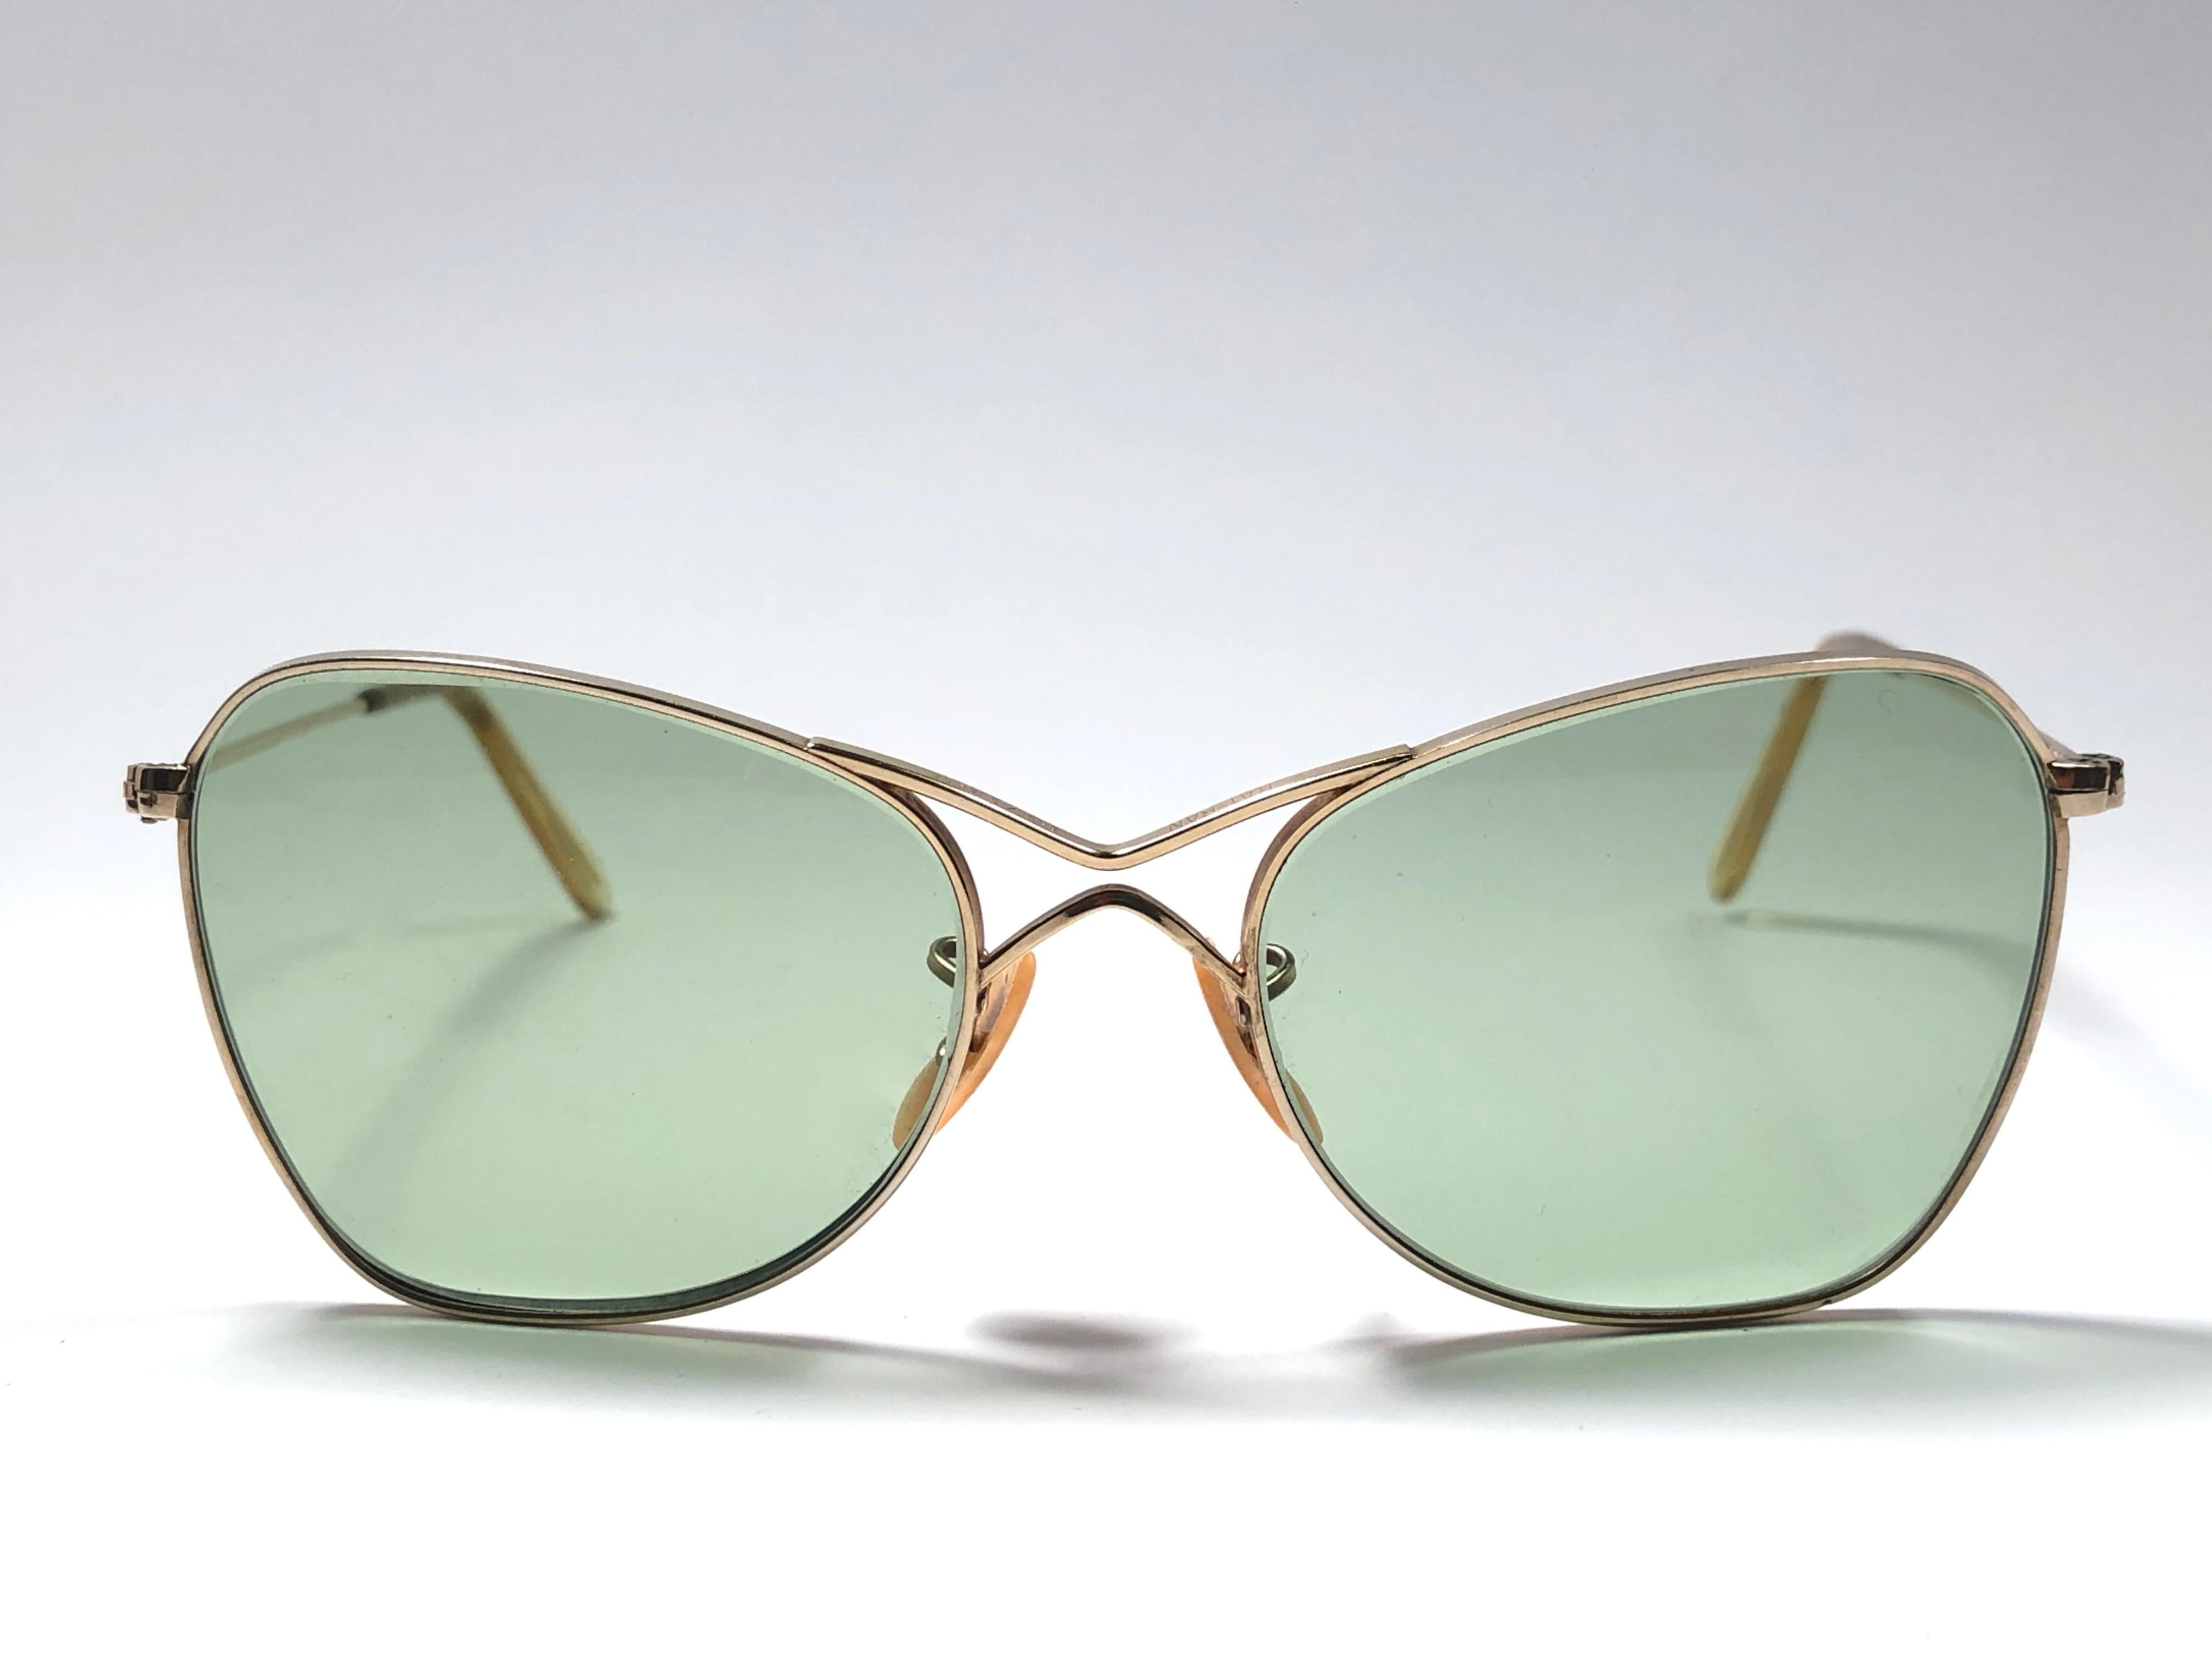 New Super special 1940's vintage Ray Ban Aviator 12K gold filled frame with light green lenses.
The smallest size available, suitable for children.  
This piece is a seldom piece. A real piece in sunglasses history.